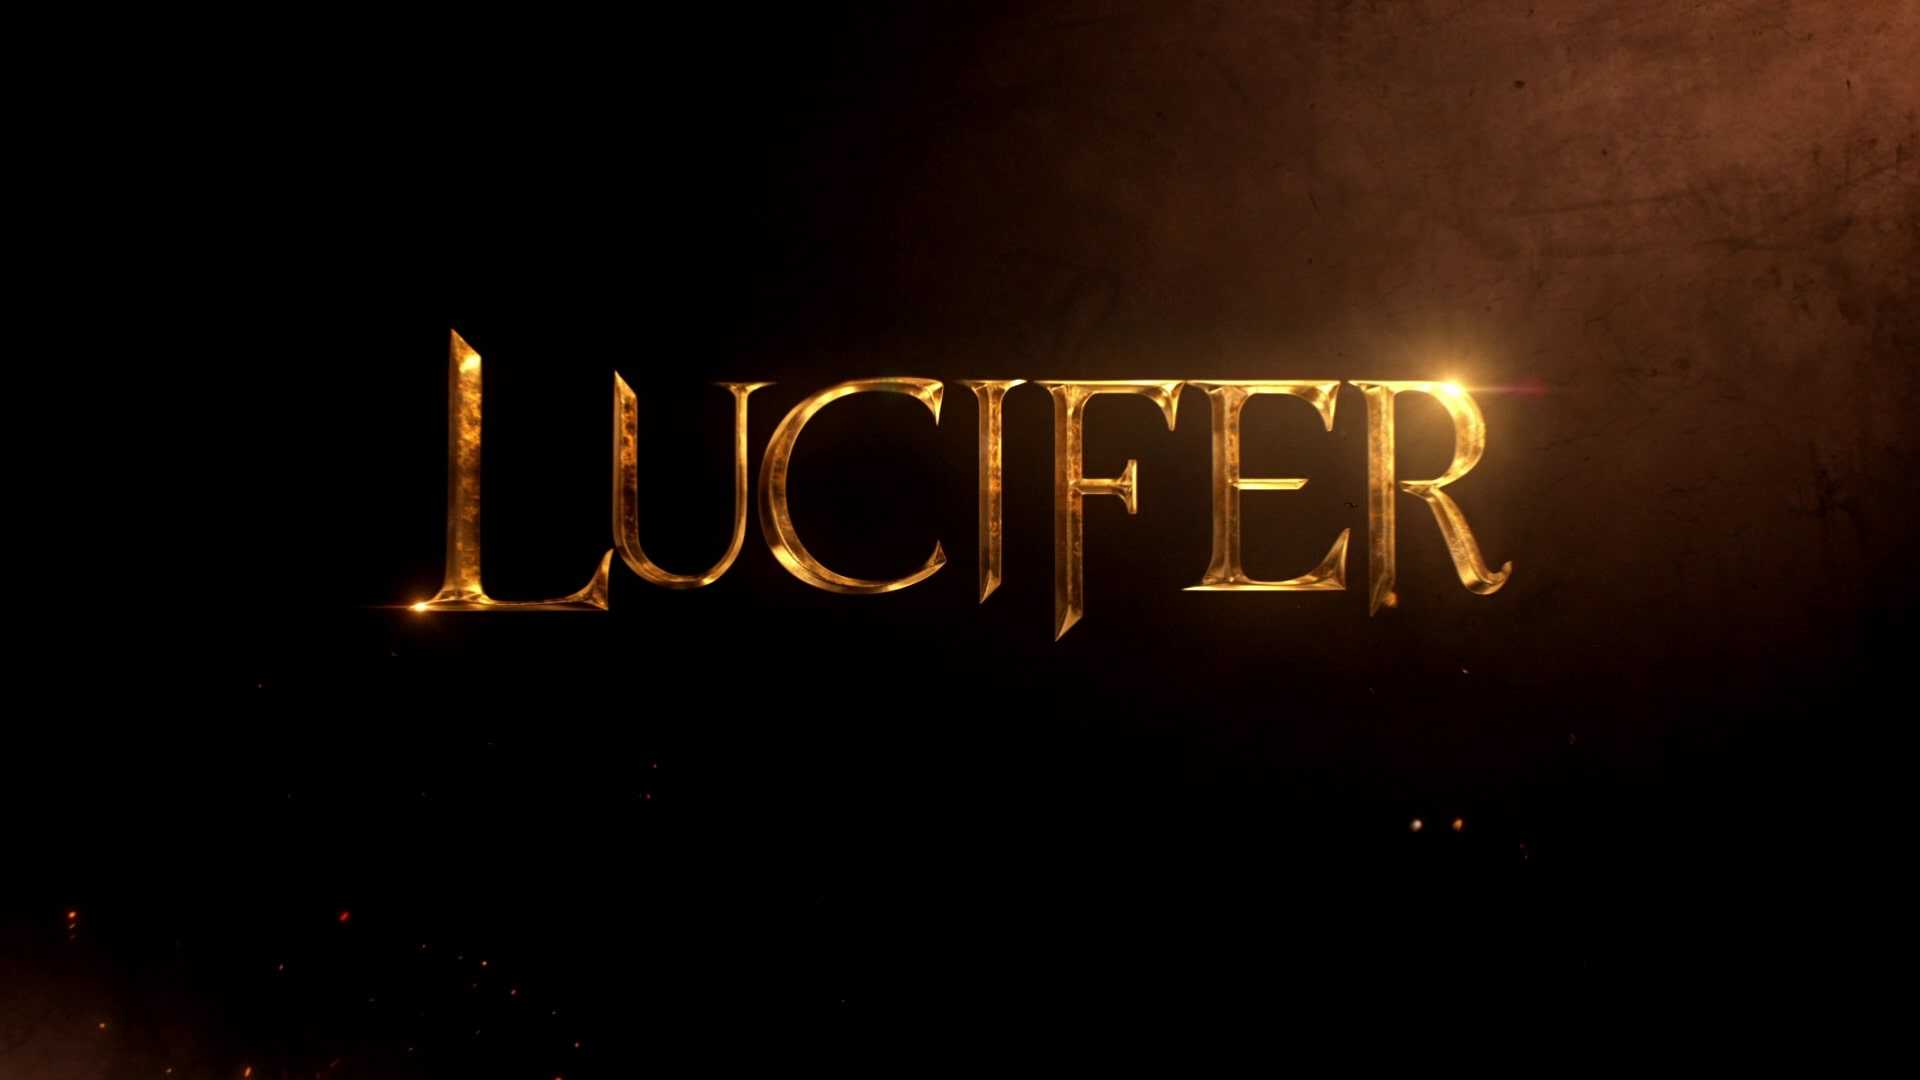 HD Lucifer Wallpaper Awesome